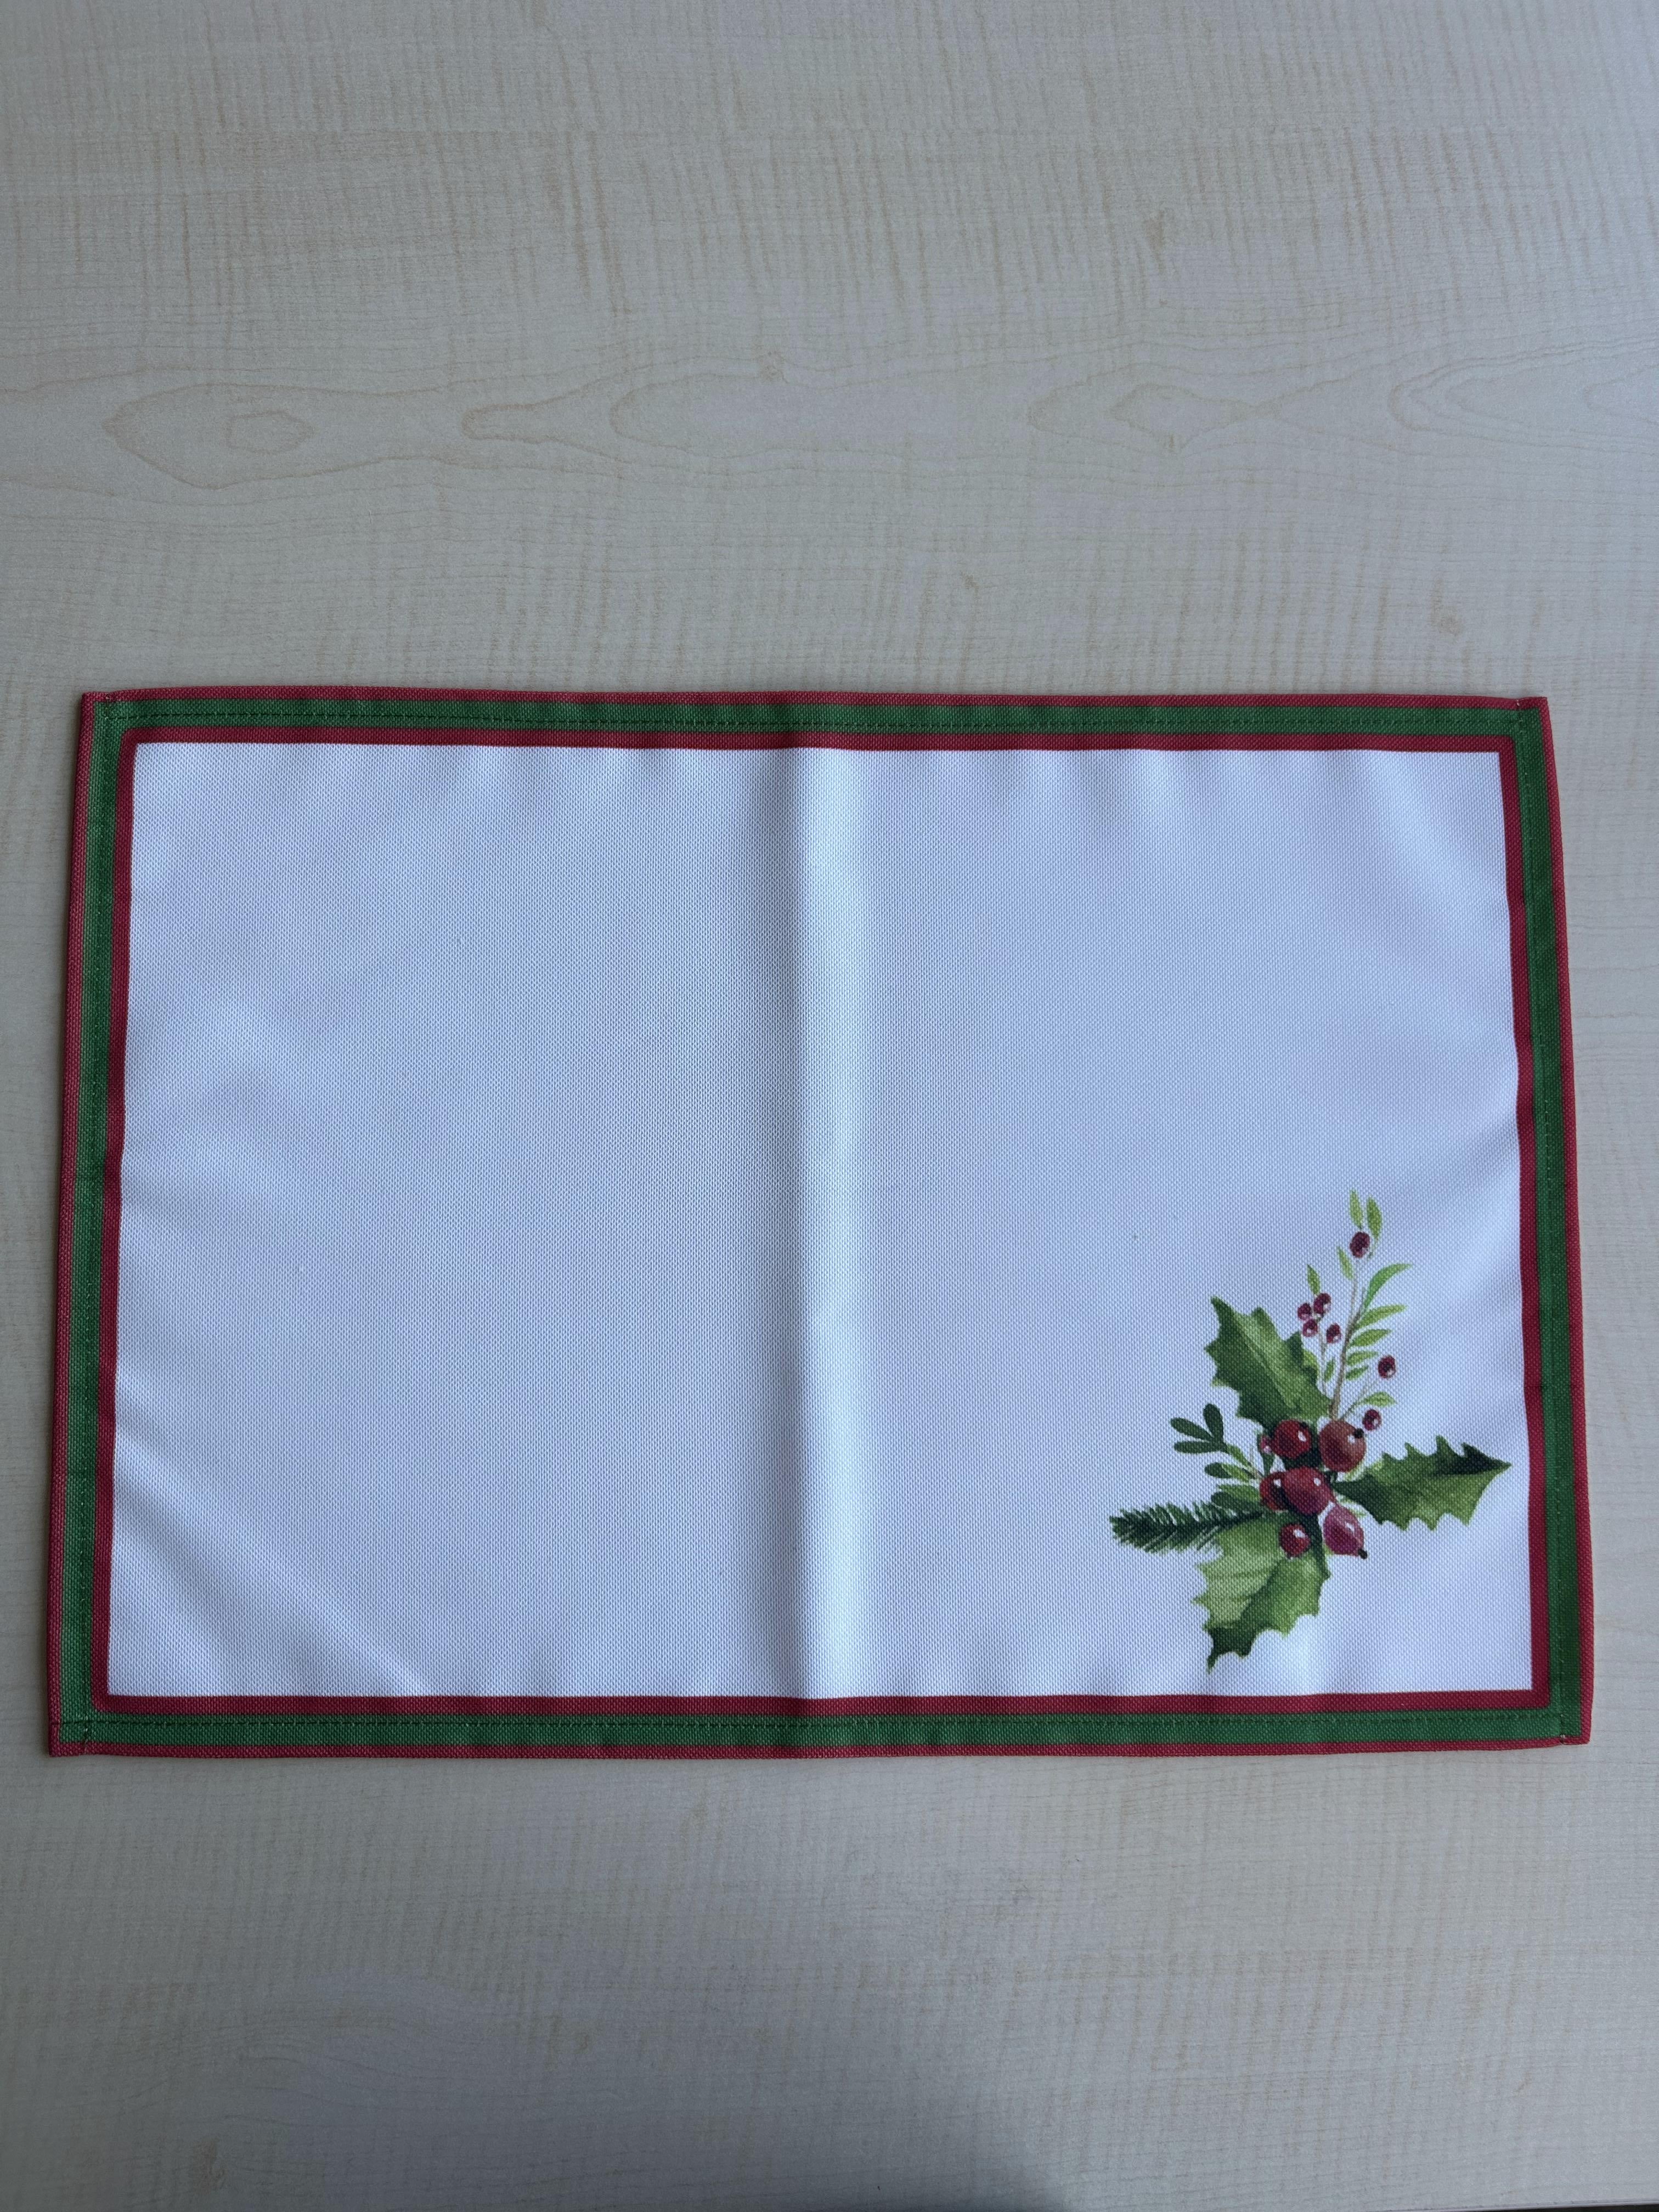 Holly Berry and Greenery Pattern Placemat, Holidays, Christmas, Set of 2 - Wear Sierra